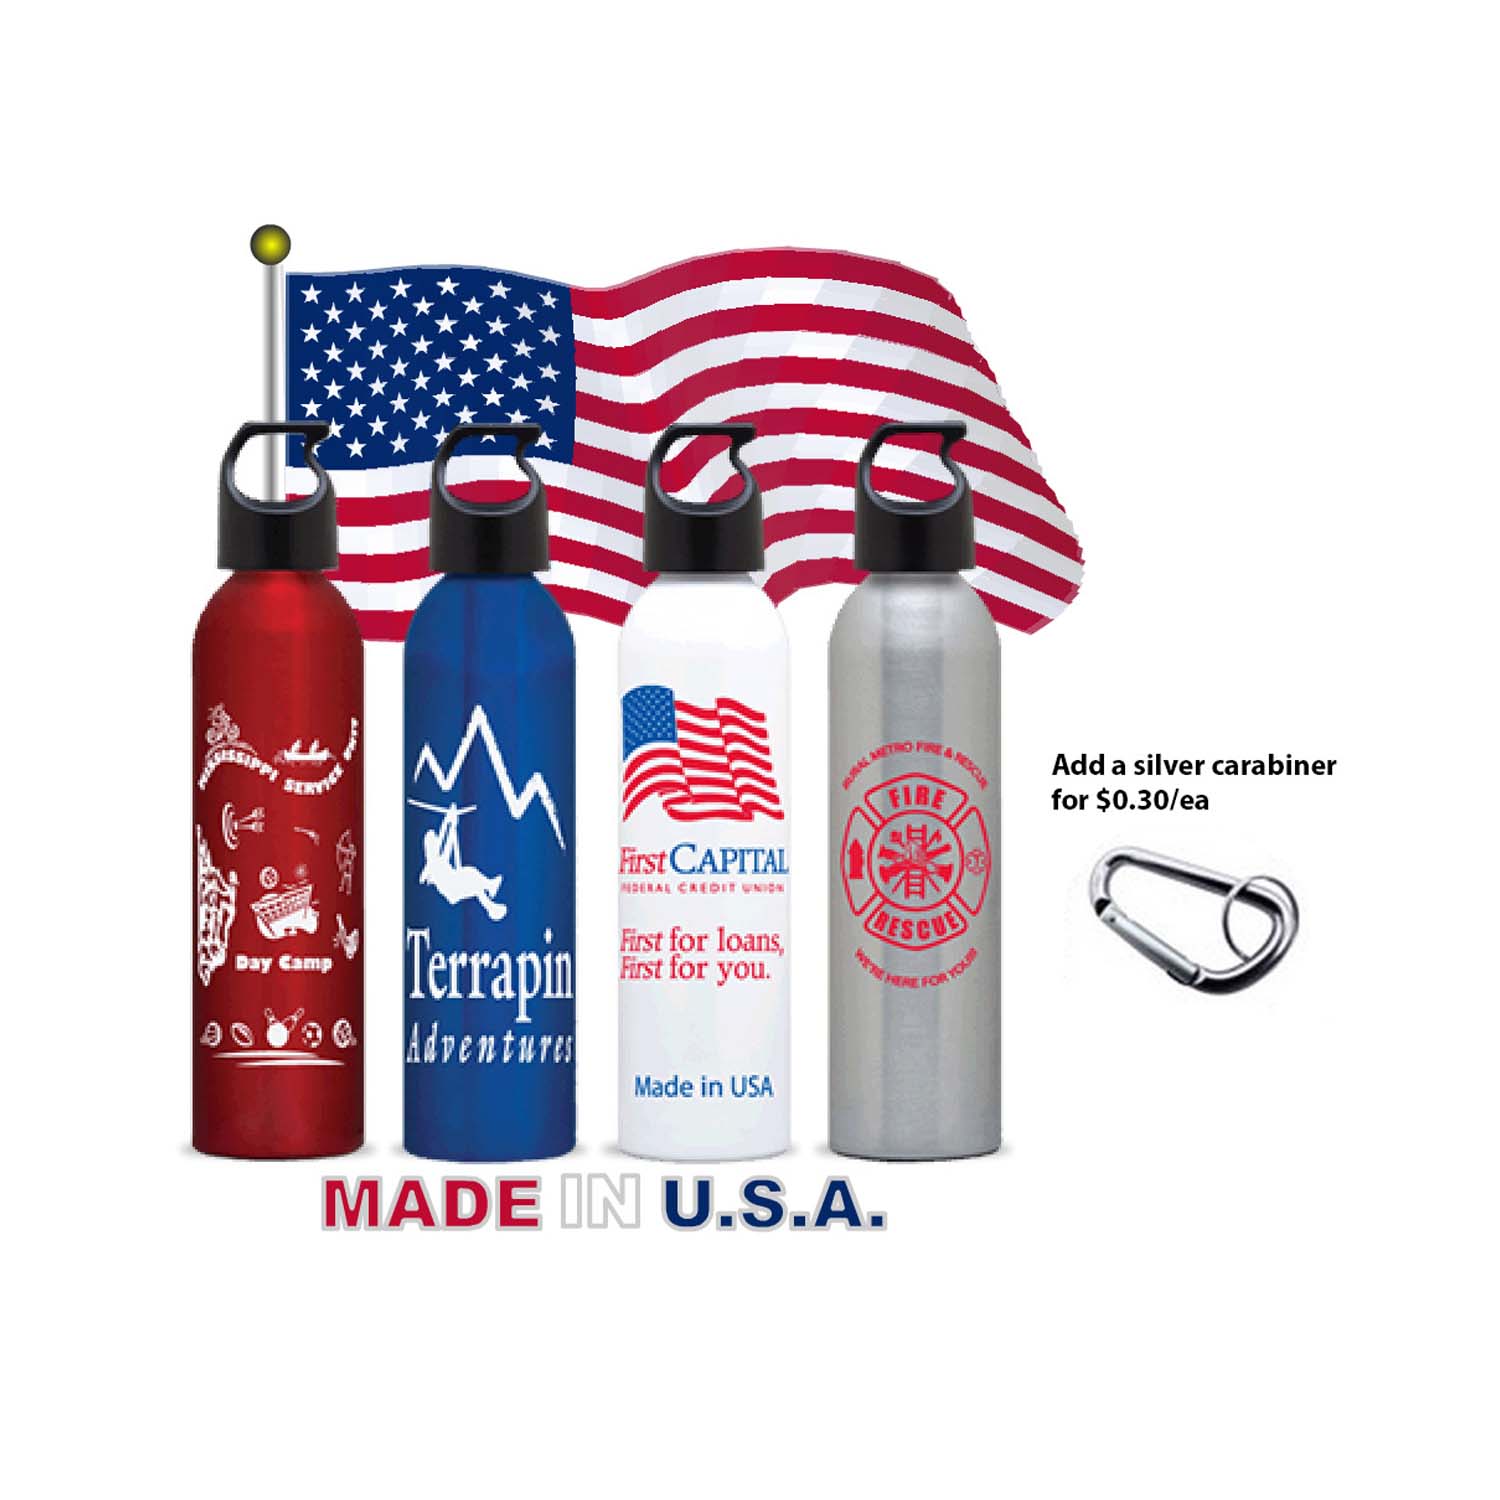 Made in USA Bottles